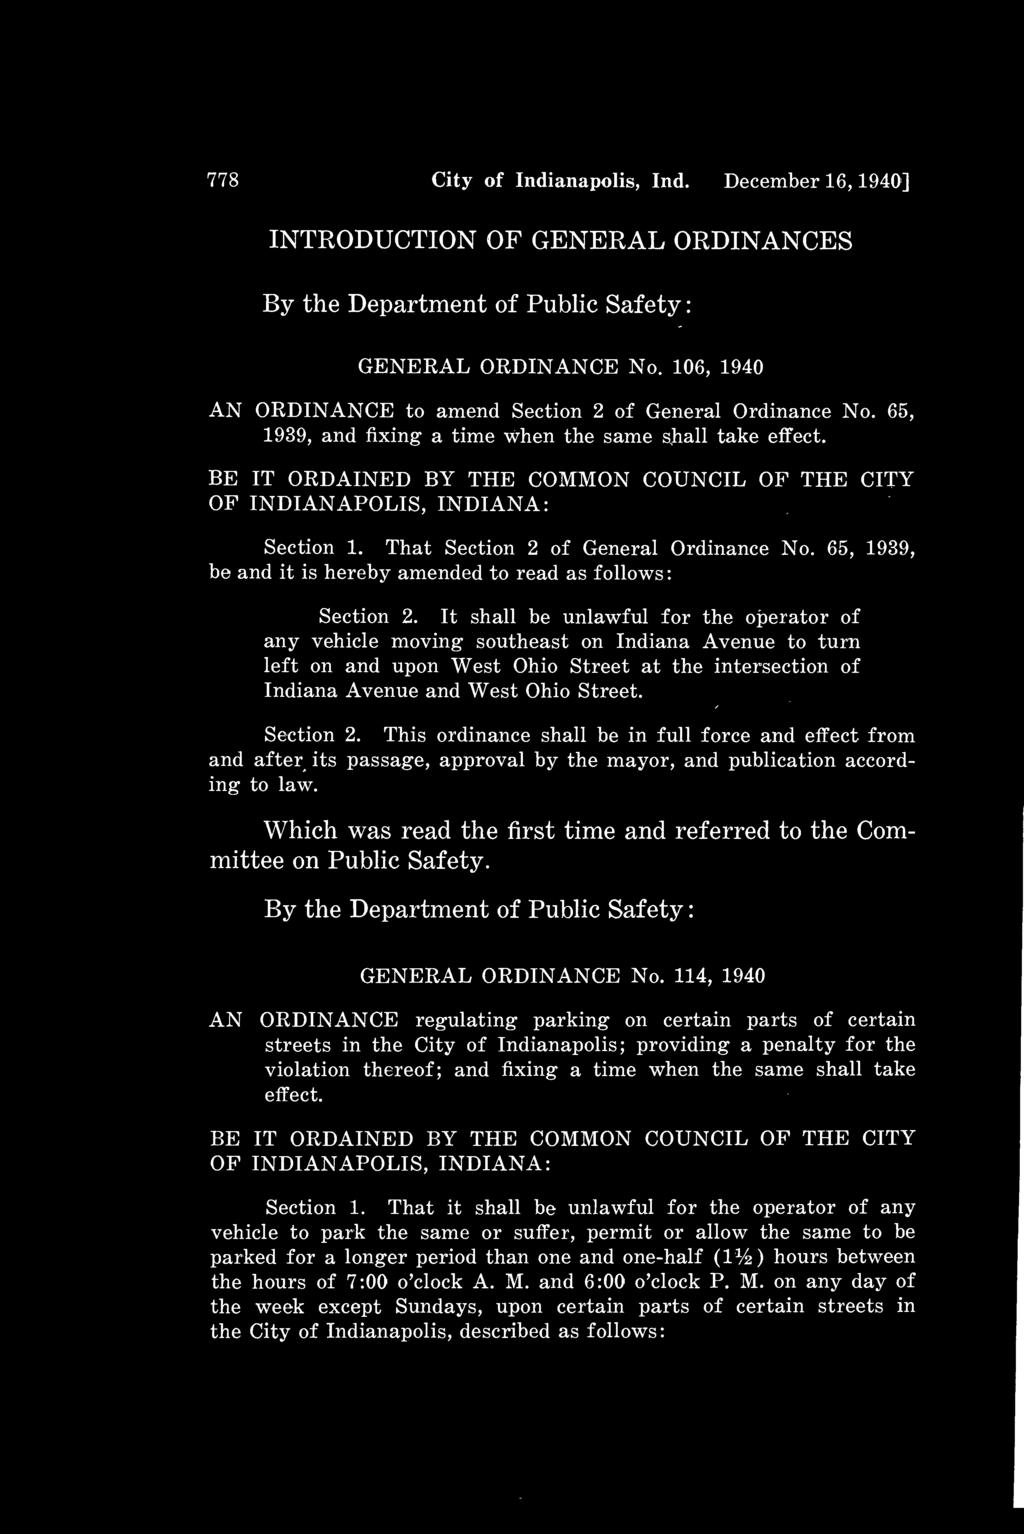 : 778 City of Indianapolis, Ind. December 16, 1940] INTRODUCTION OF GENERAL ORDINANCES By the Department of Public Safety GENERAL ORDINANCE No.